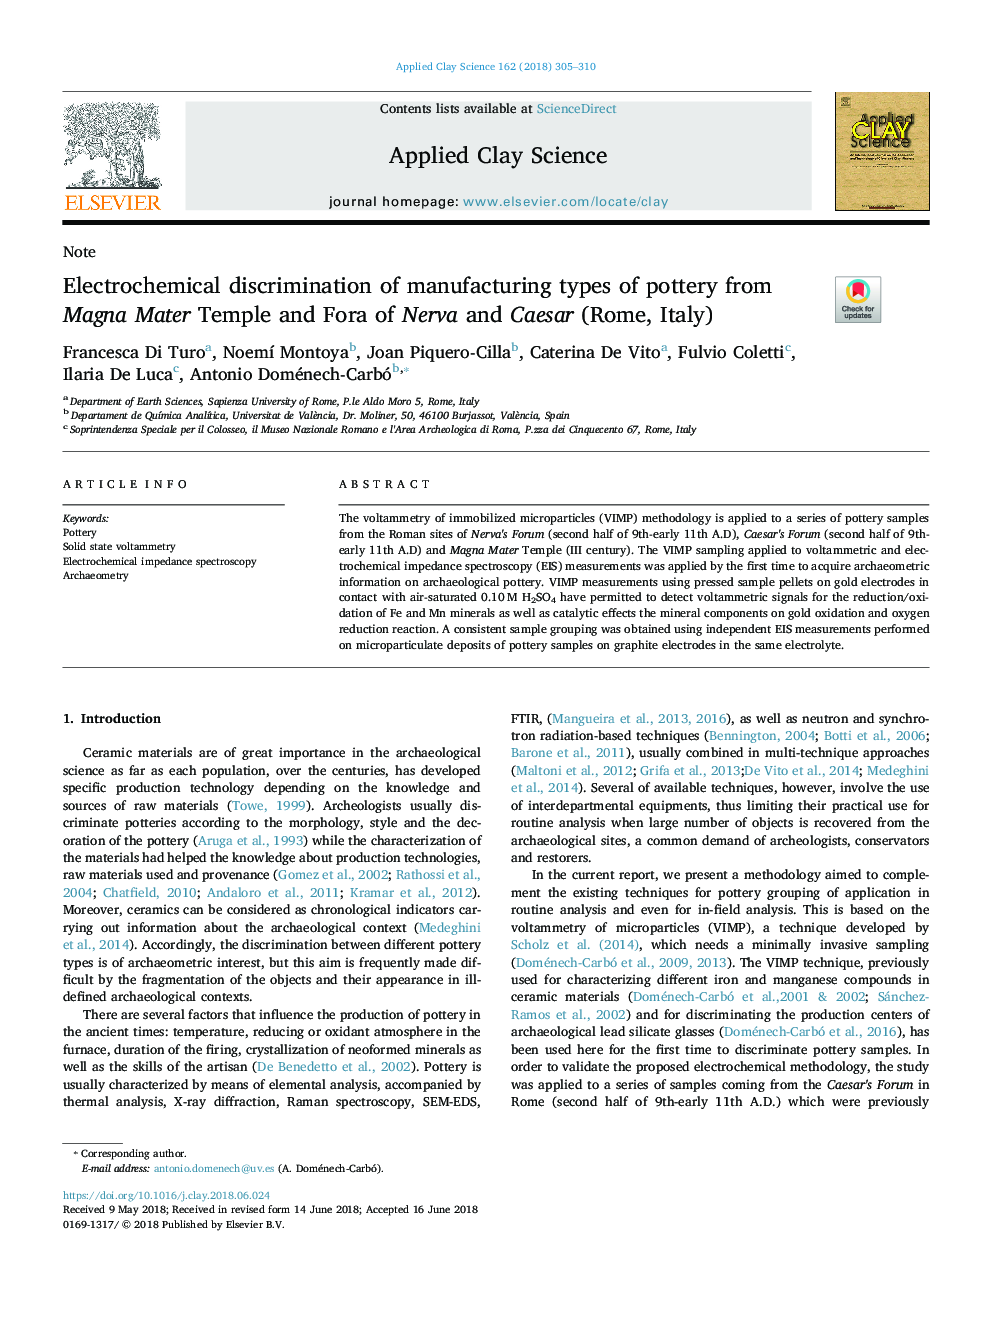 Electrochemical discrimination of manufacturing types of pottery from Magna Mater Temple and Fora of Nerva and Caesar (Rome, Italy)